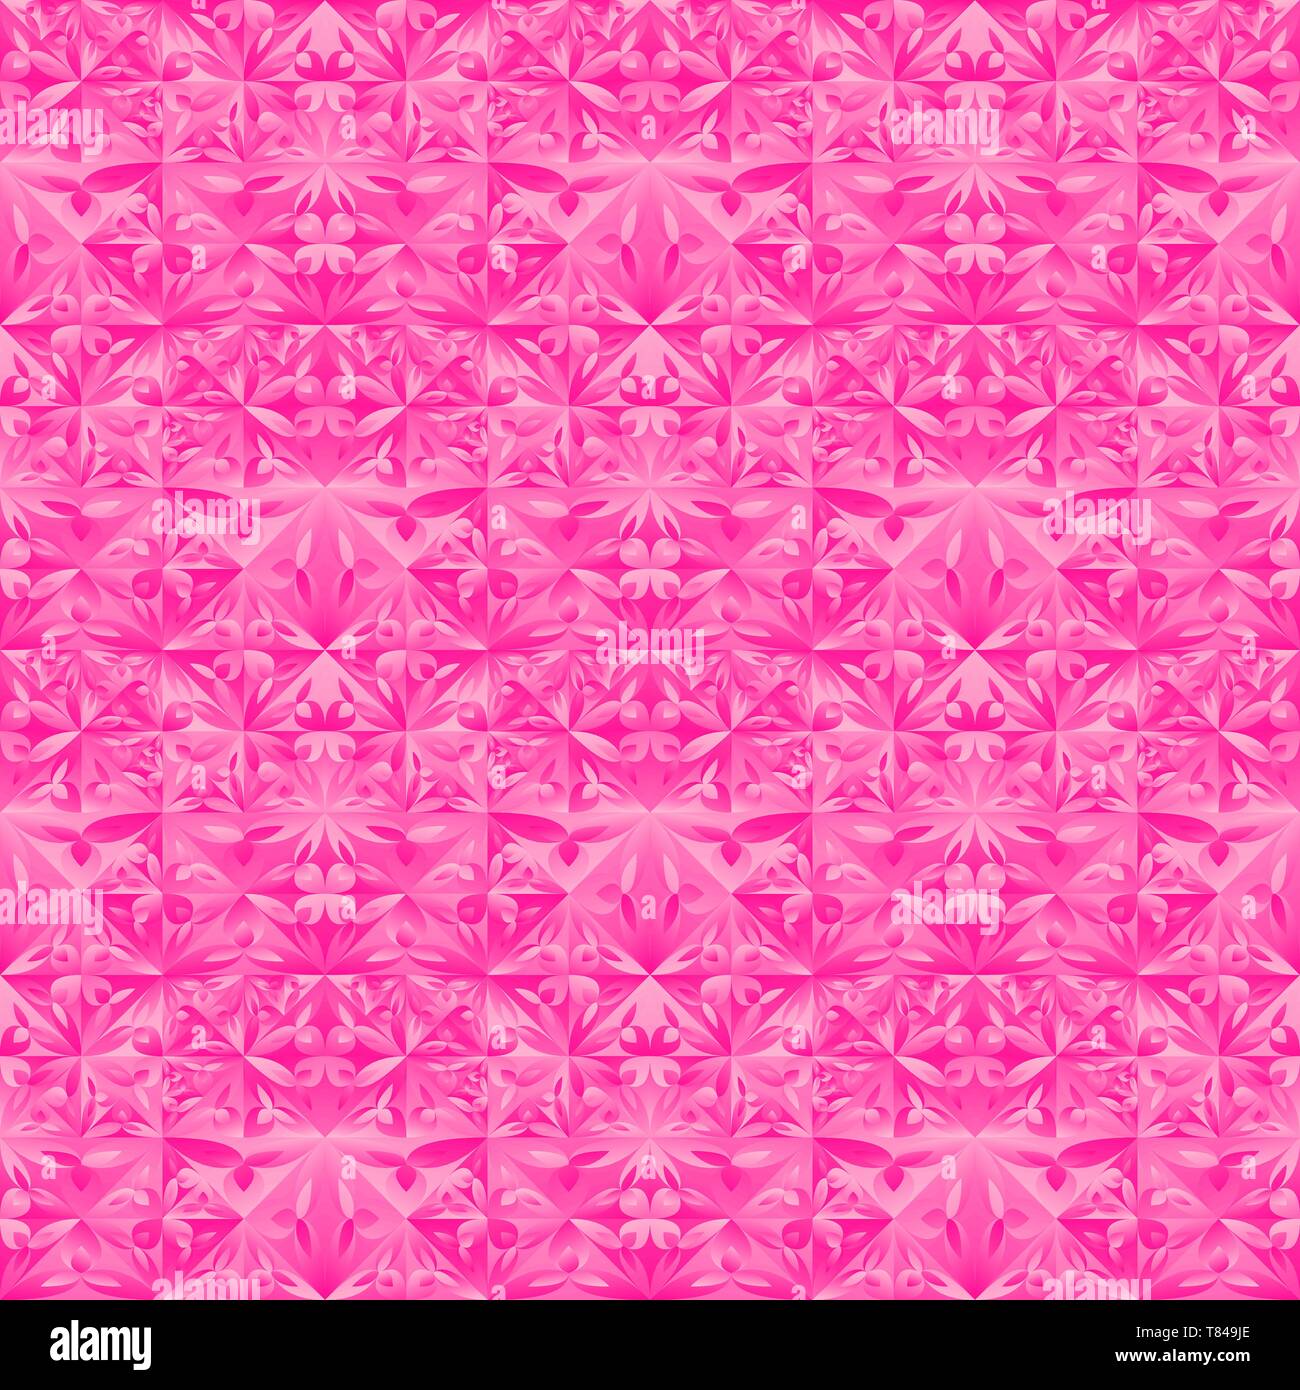 Polygonal geometrical pink floral mosaic pattern background design Stock Vector